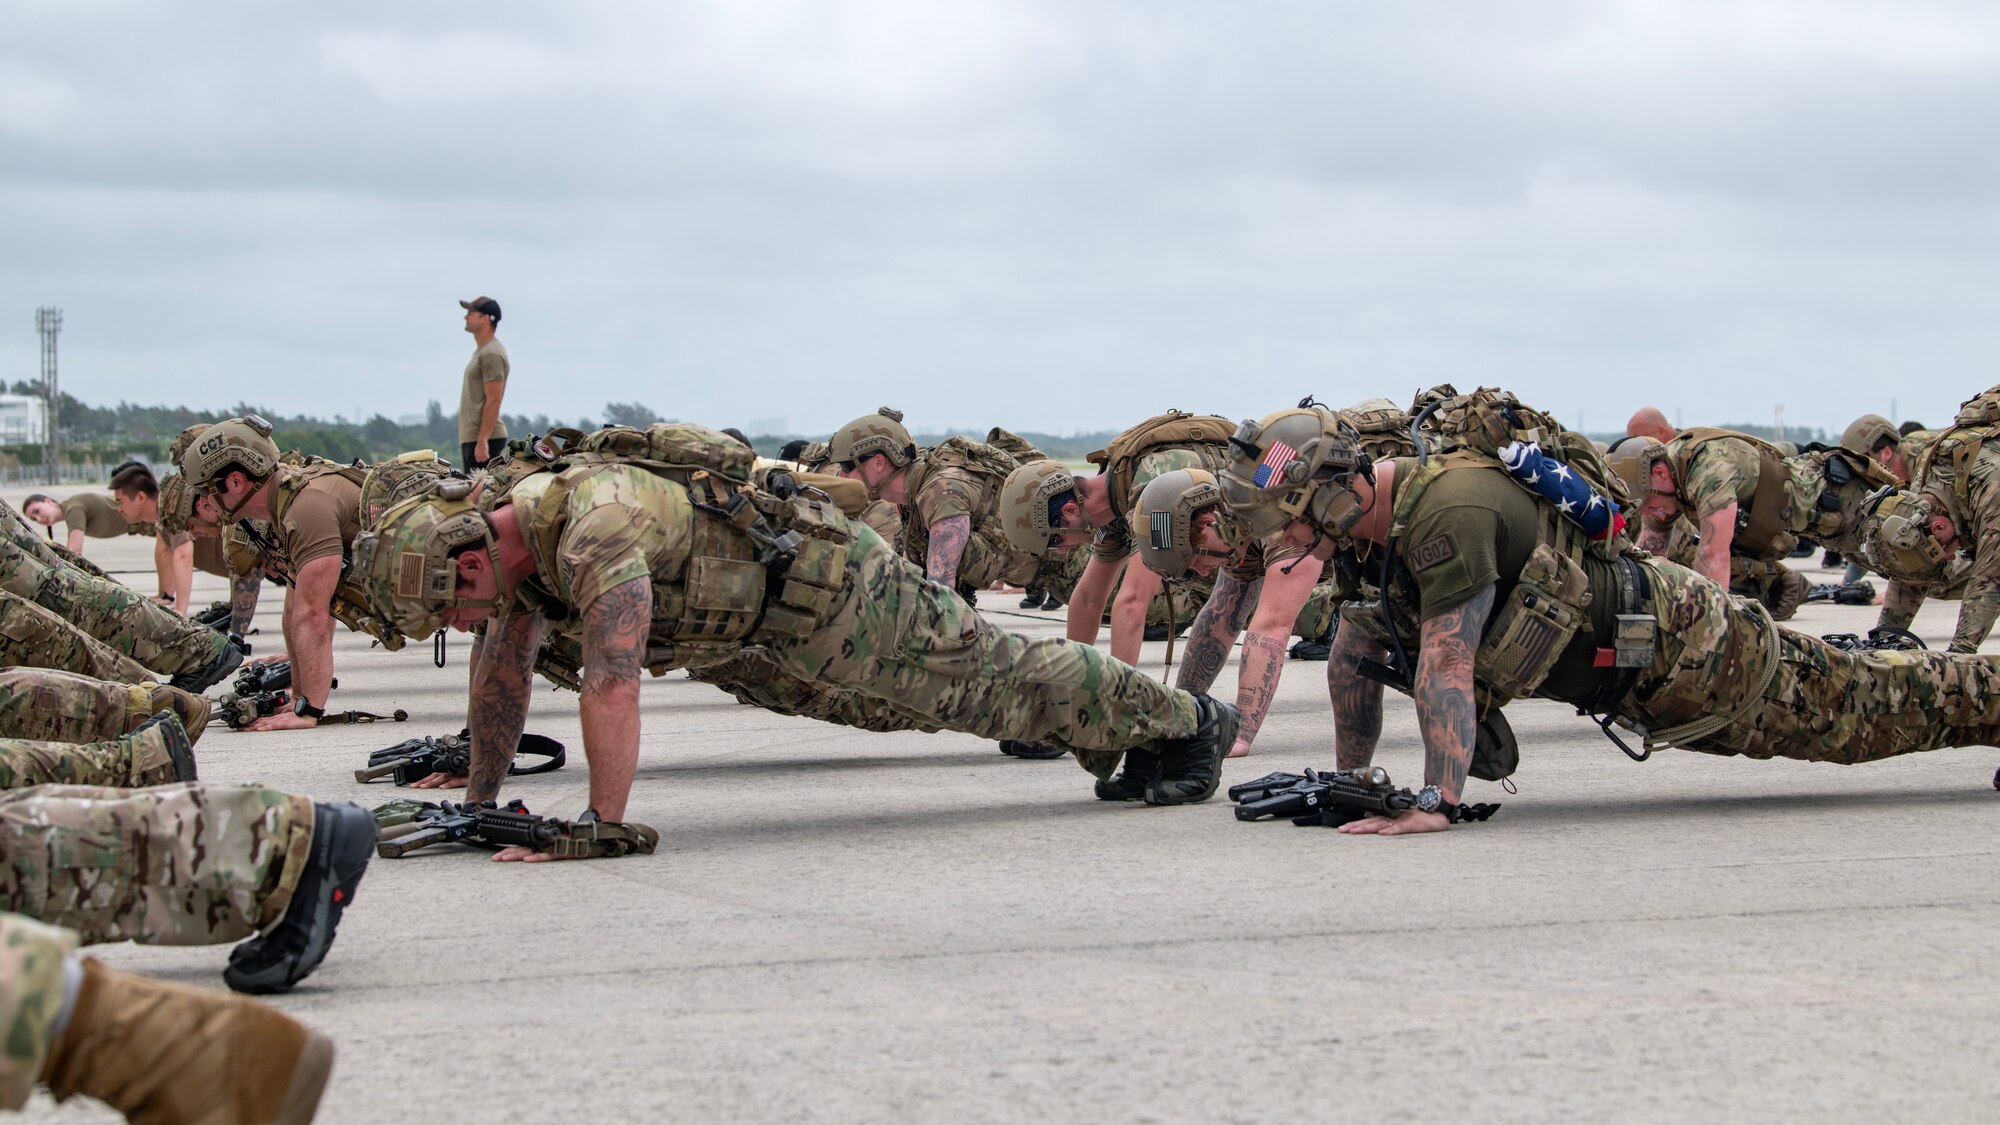 U.S. Air Force special tactics Airmen with the 320th Special Tactics Squadron perform a set of memorial push-ups during Monster Mash, an operational readiness and resilience training, at Kadena Air Base, Japan, May 5, 2023. The push-ups were conducted multiple times throughout the challenge to honor fellow special tactics teammates who lost their lives during the month of May. (U.S. Air Force photo by Staff Sgt. Jessi Roth)